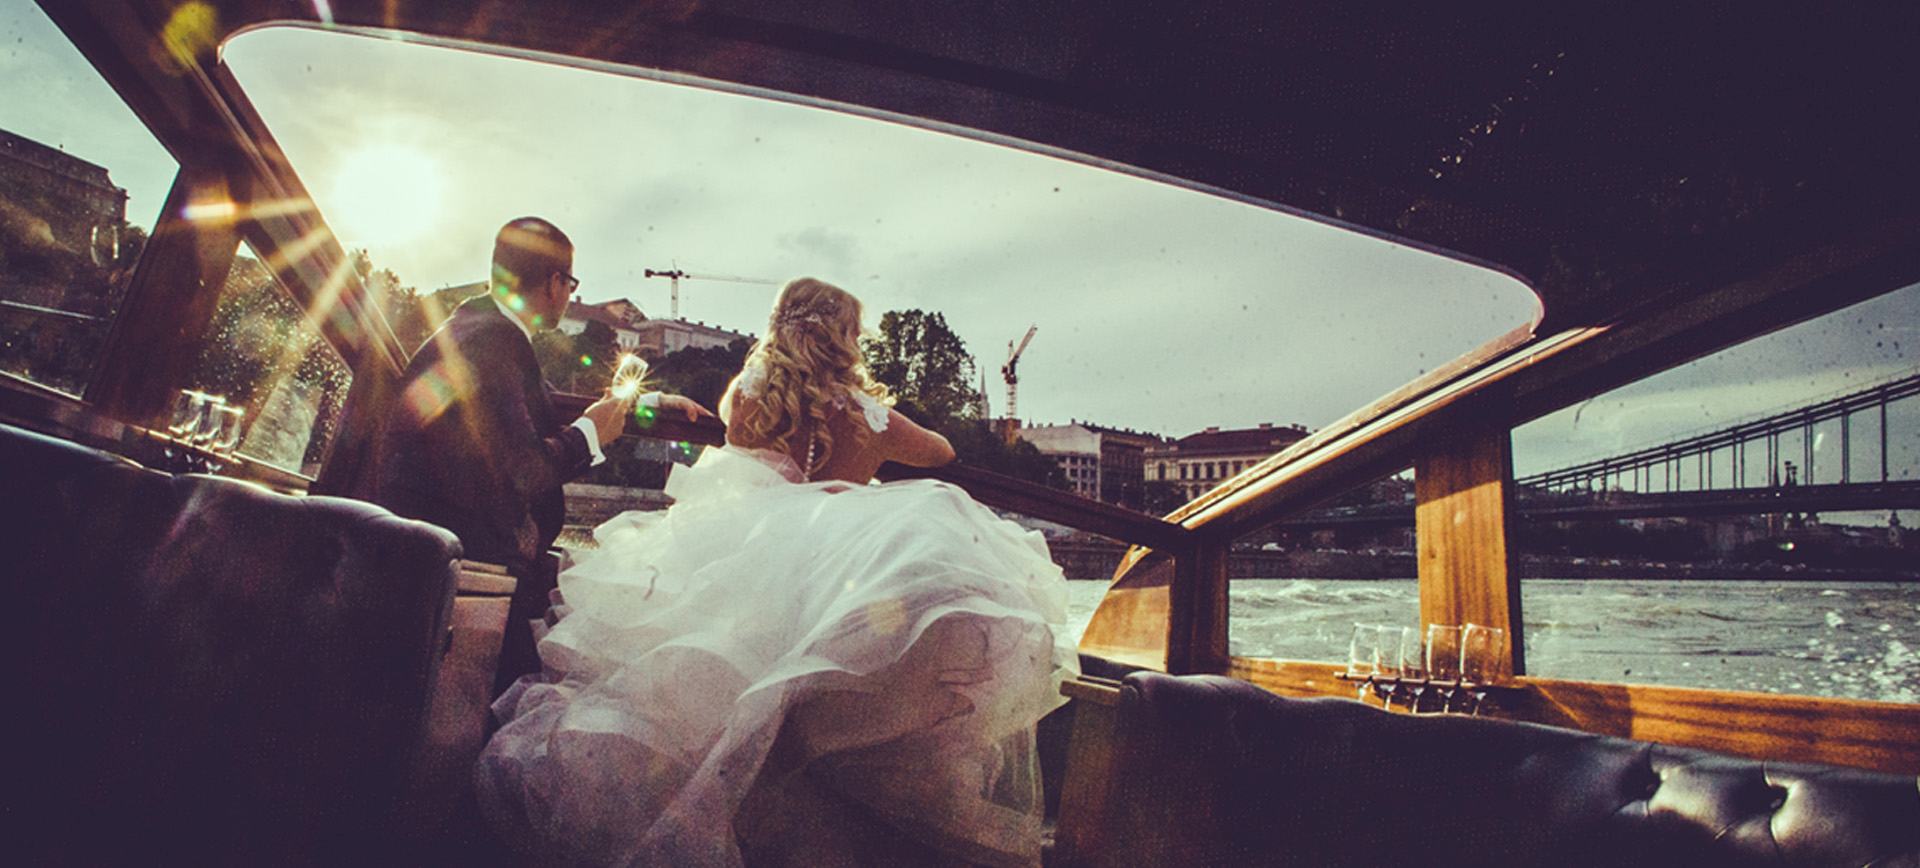 budapest wedding boat ride + sightseeing - europe city elopement package